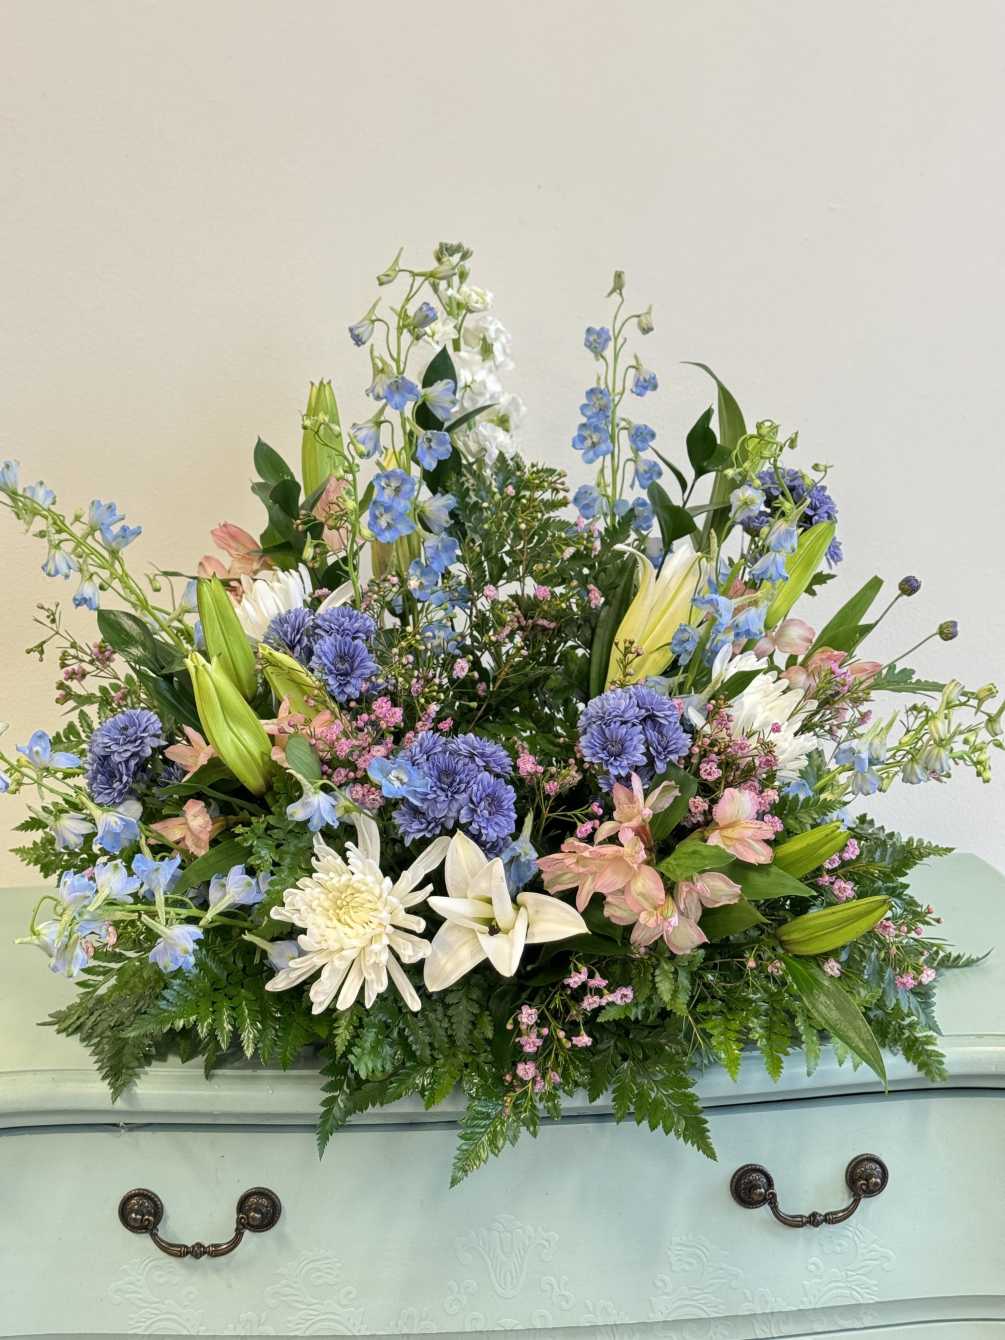 Hints of blue, white and pink colors elegantly adorn the cremation urn.